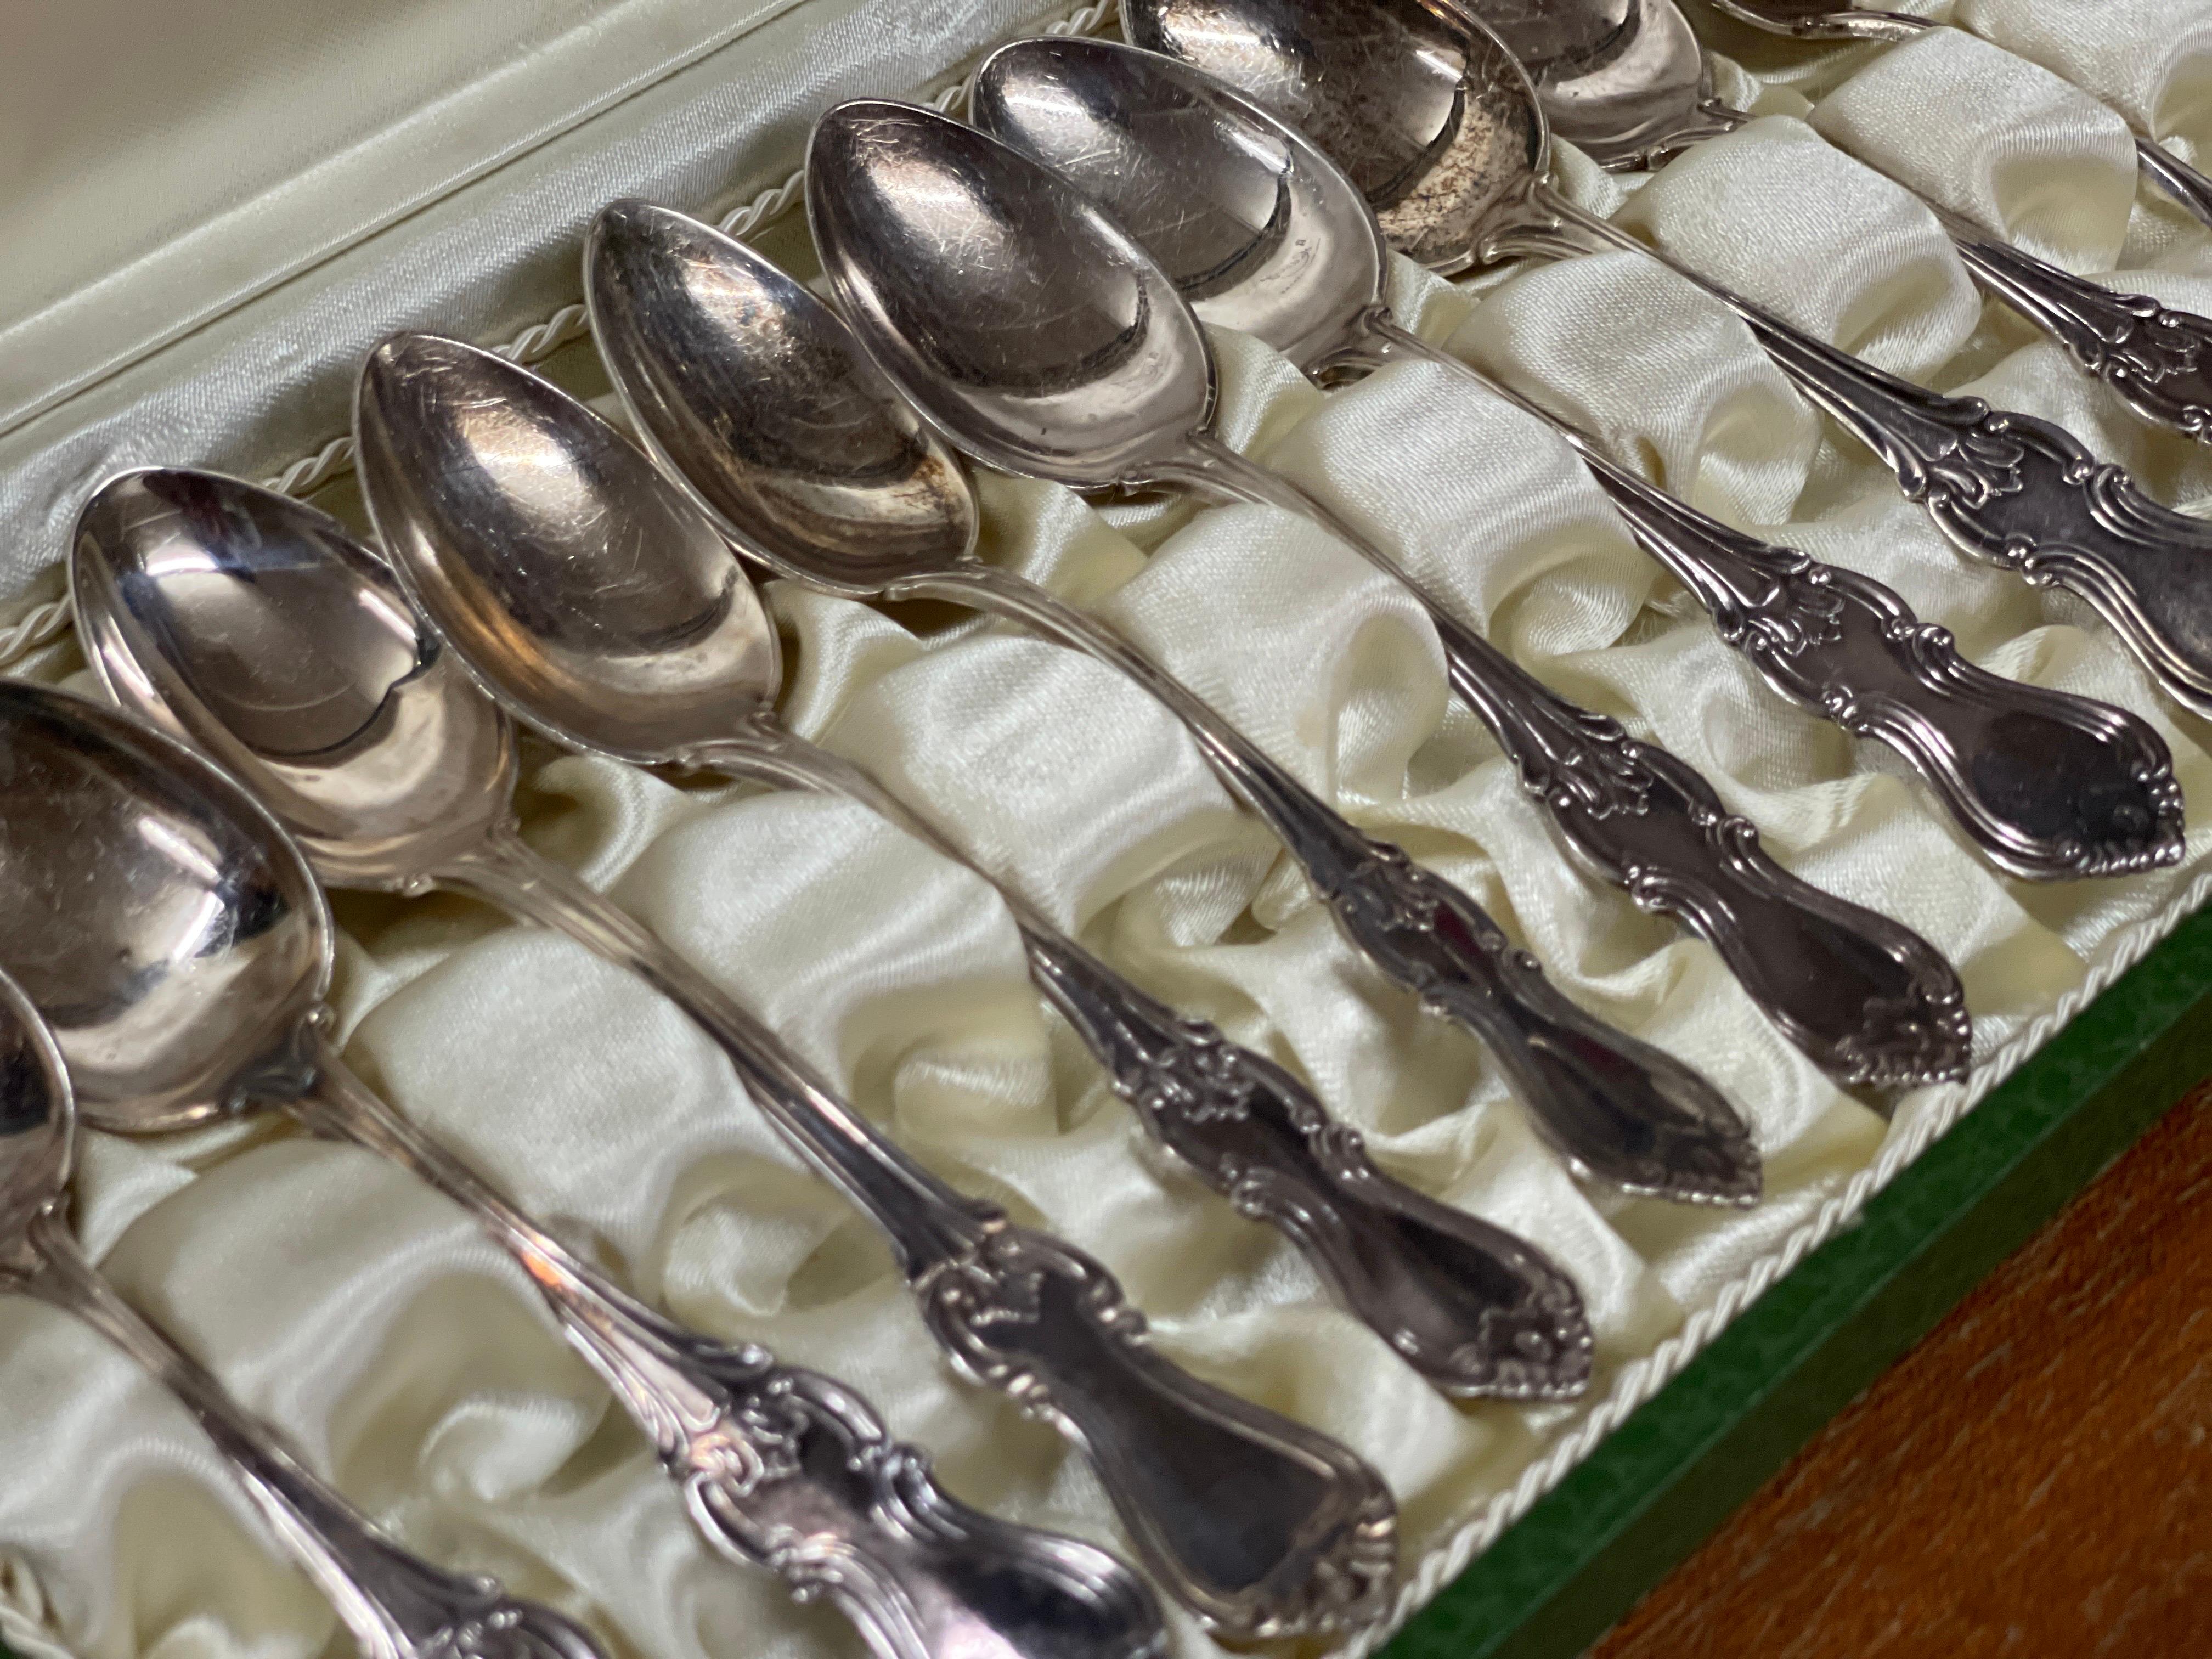 Early 20th Century Exclusive Tea COFFEE SPOONS, 12 pcs. Sterling Silver & Box, Model Olga